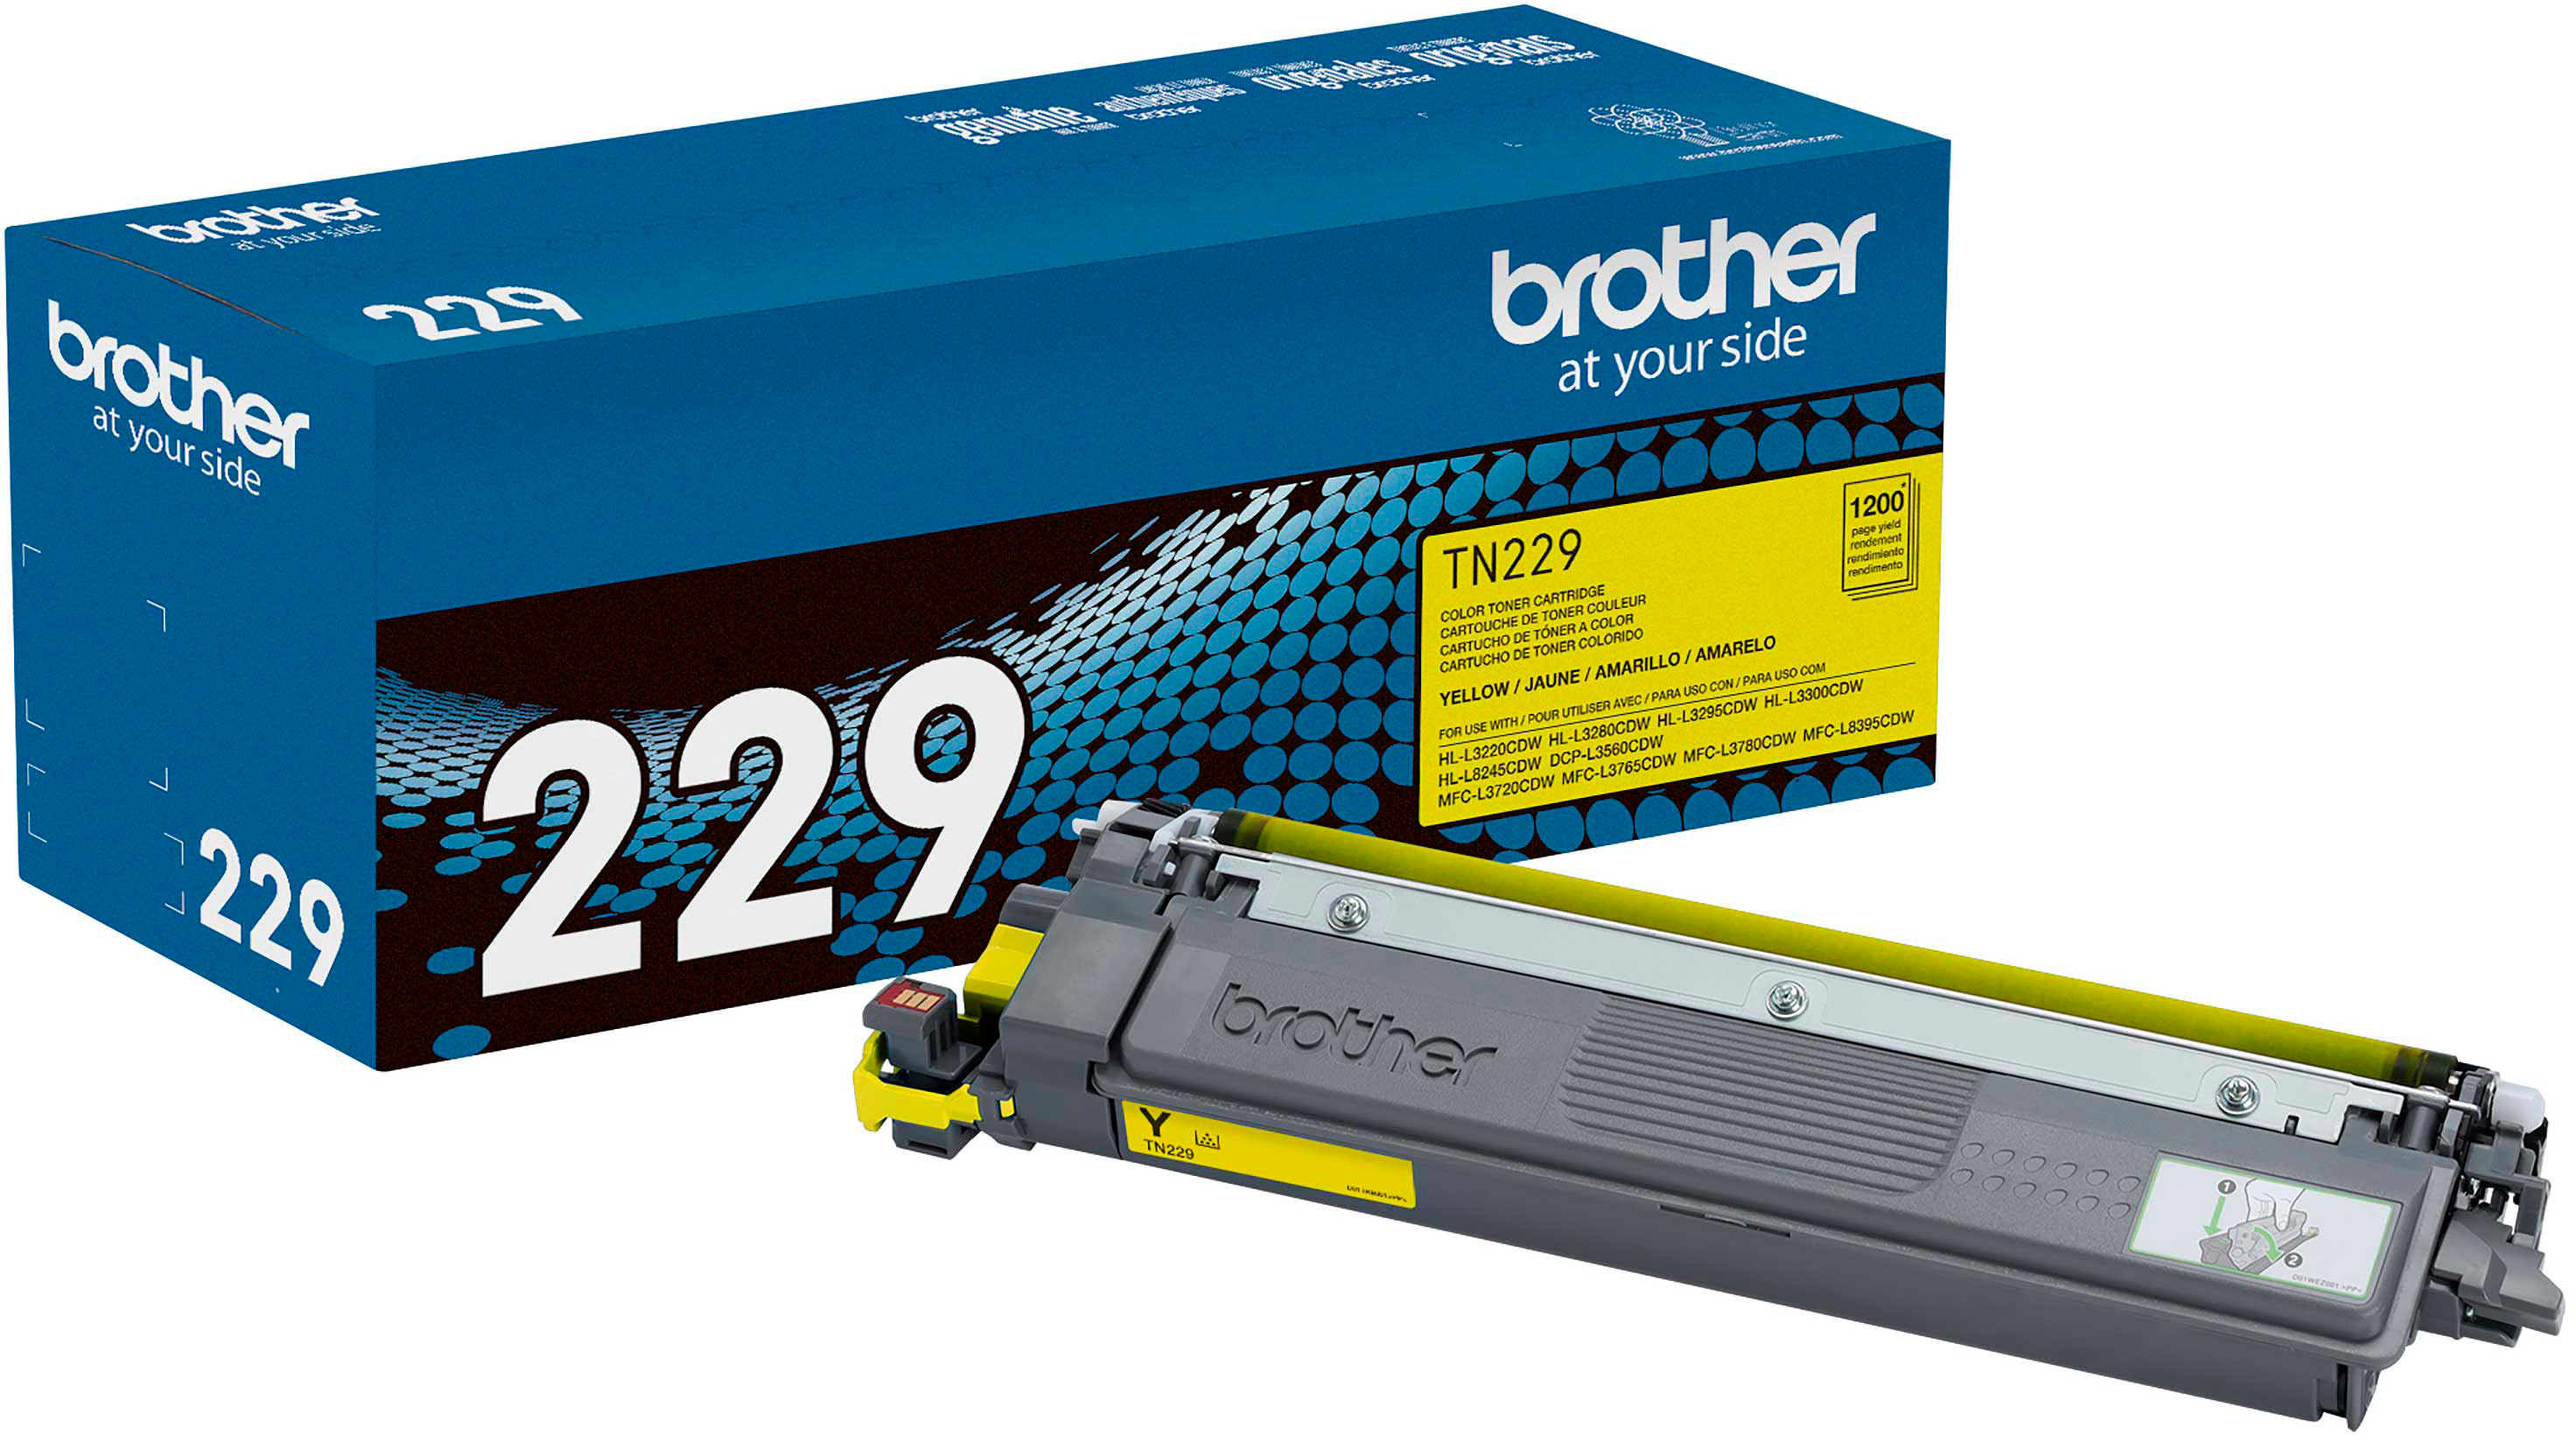 Brother TN-243Y Toner Cartridge, Yellow, Single Pack, Standard Yield,  Includes 1 x Toner Cartridge, Brother Genuine Supplies